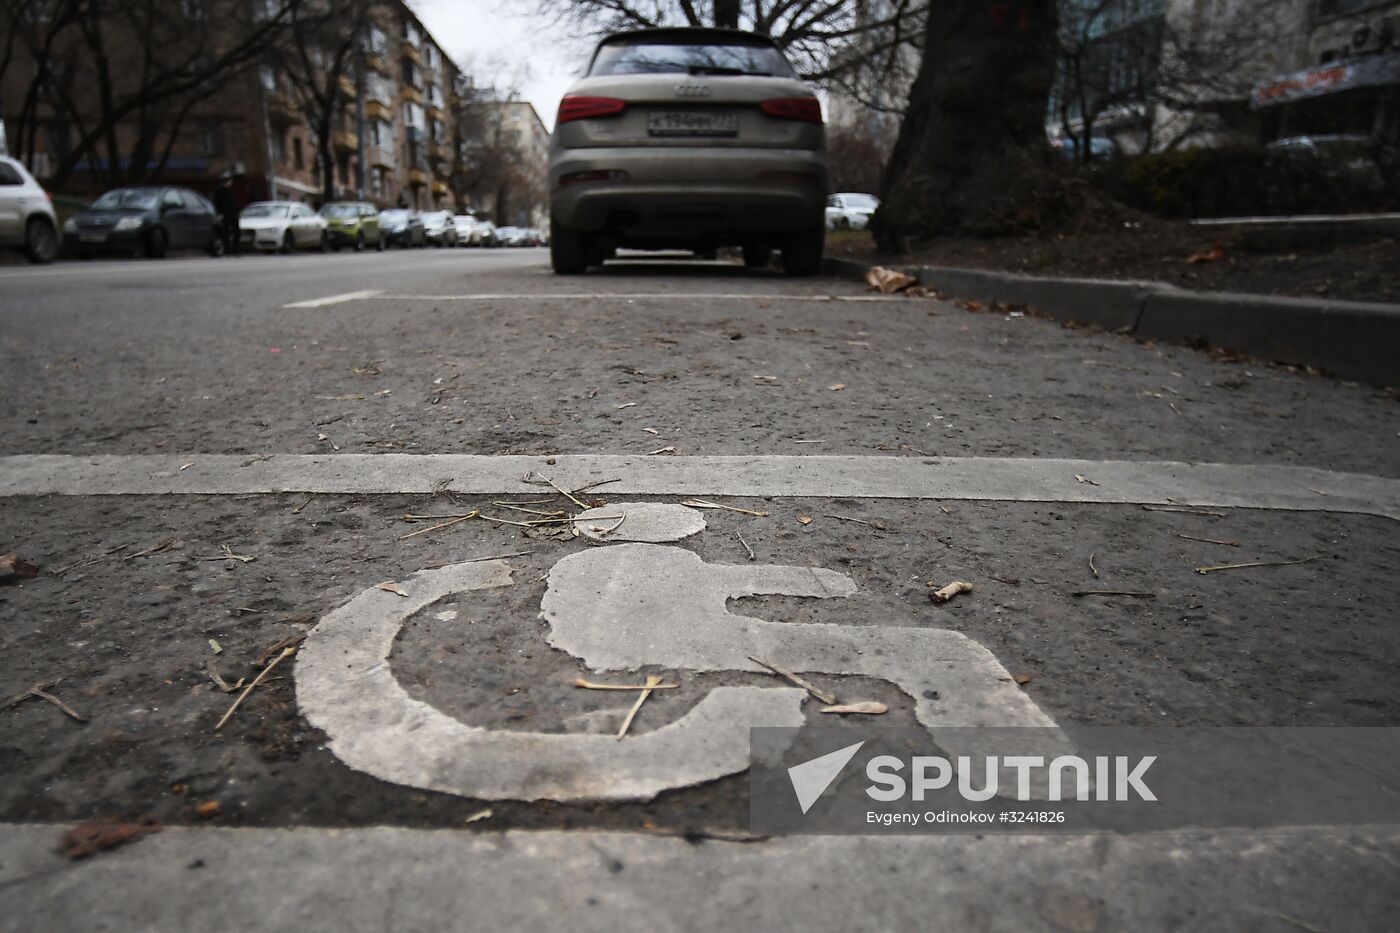 Parking in the City: Testing Parking for People with Restricted Mobility